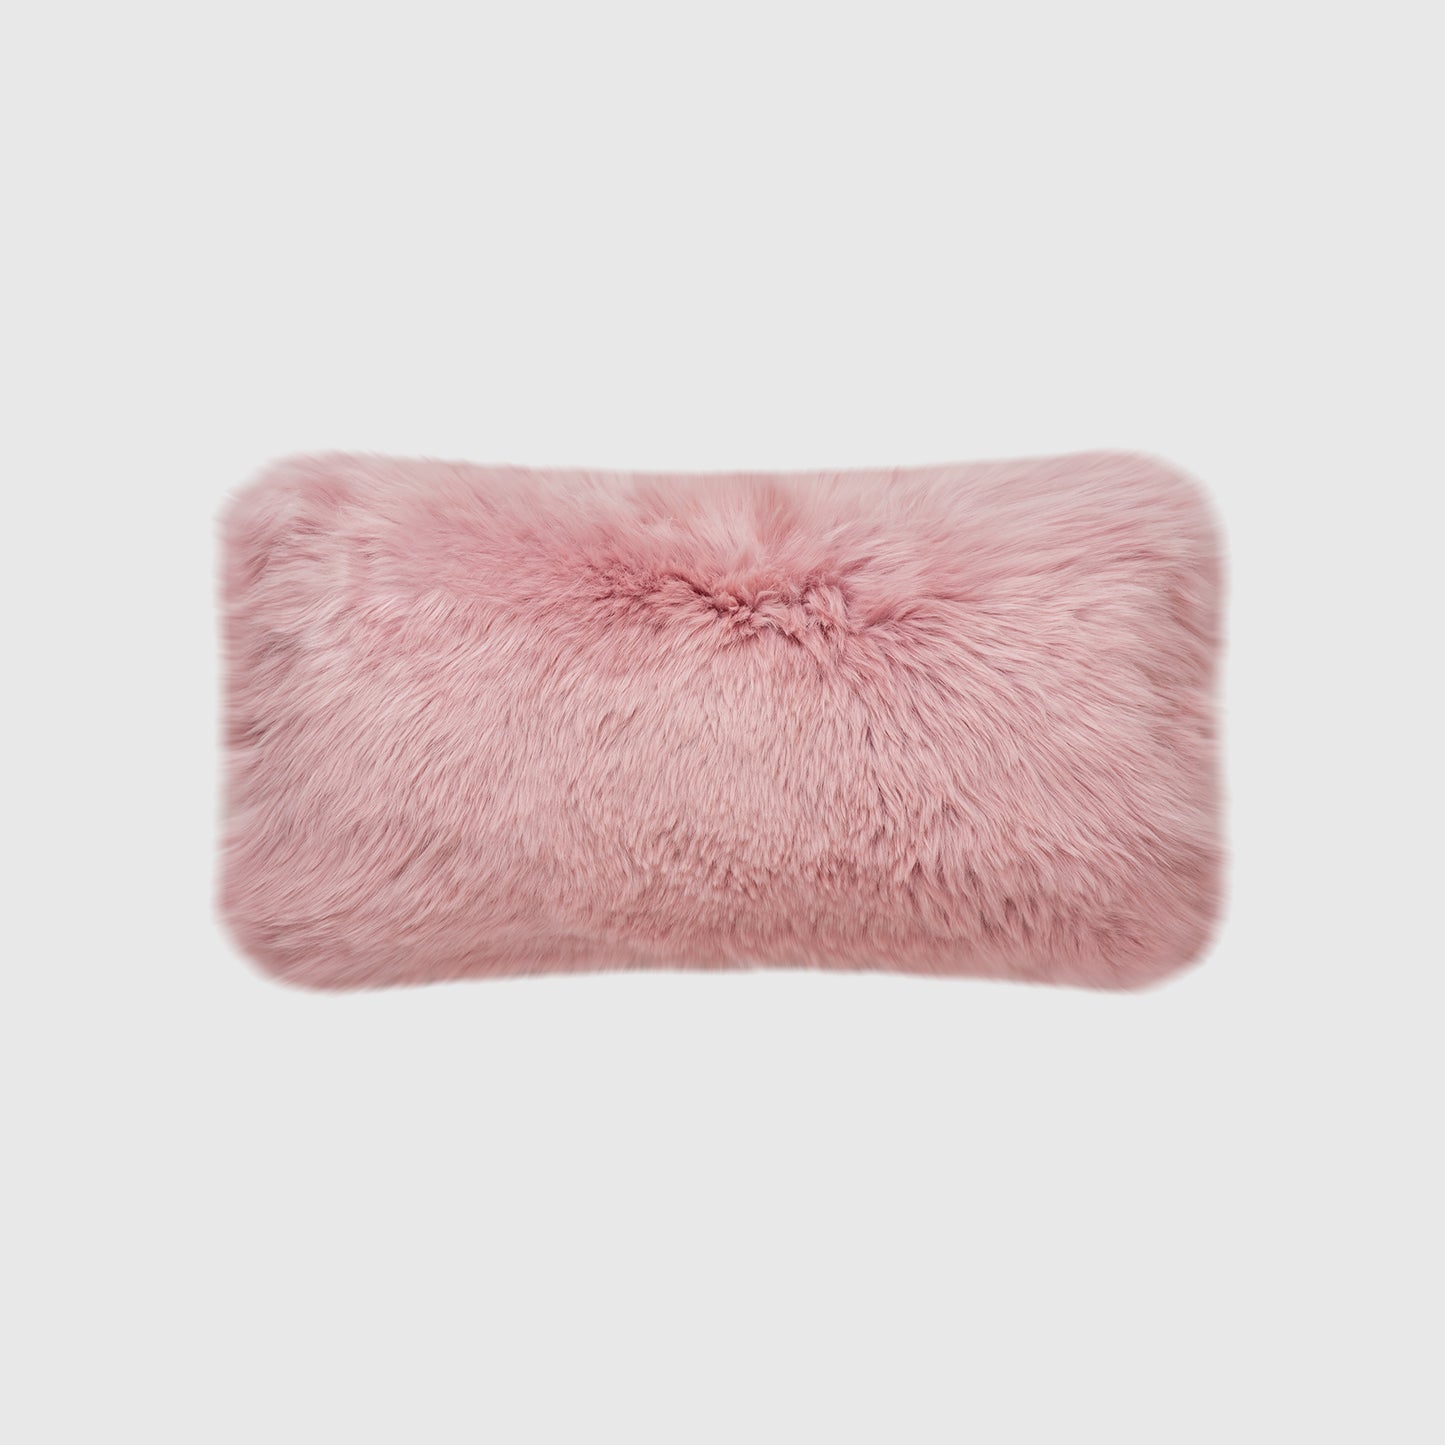 The Mood | Charlie Sheepskin Double-sided 12"x22" Pillow, Rosa